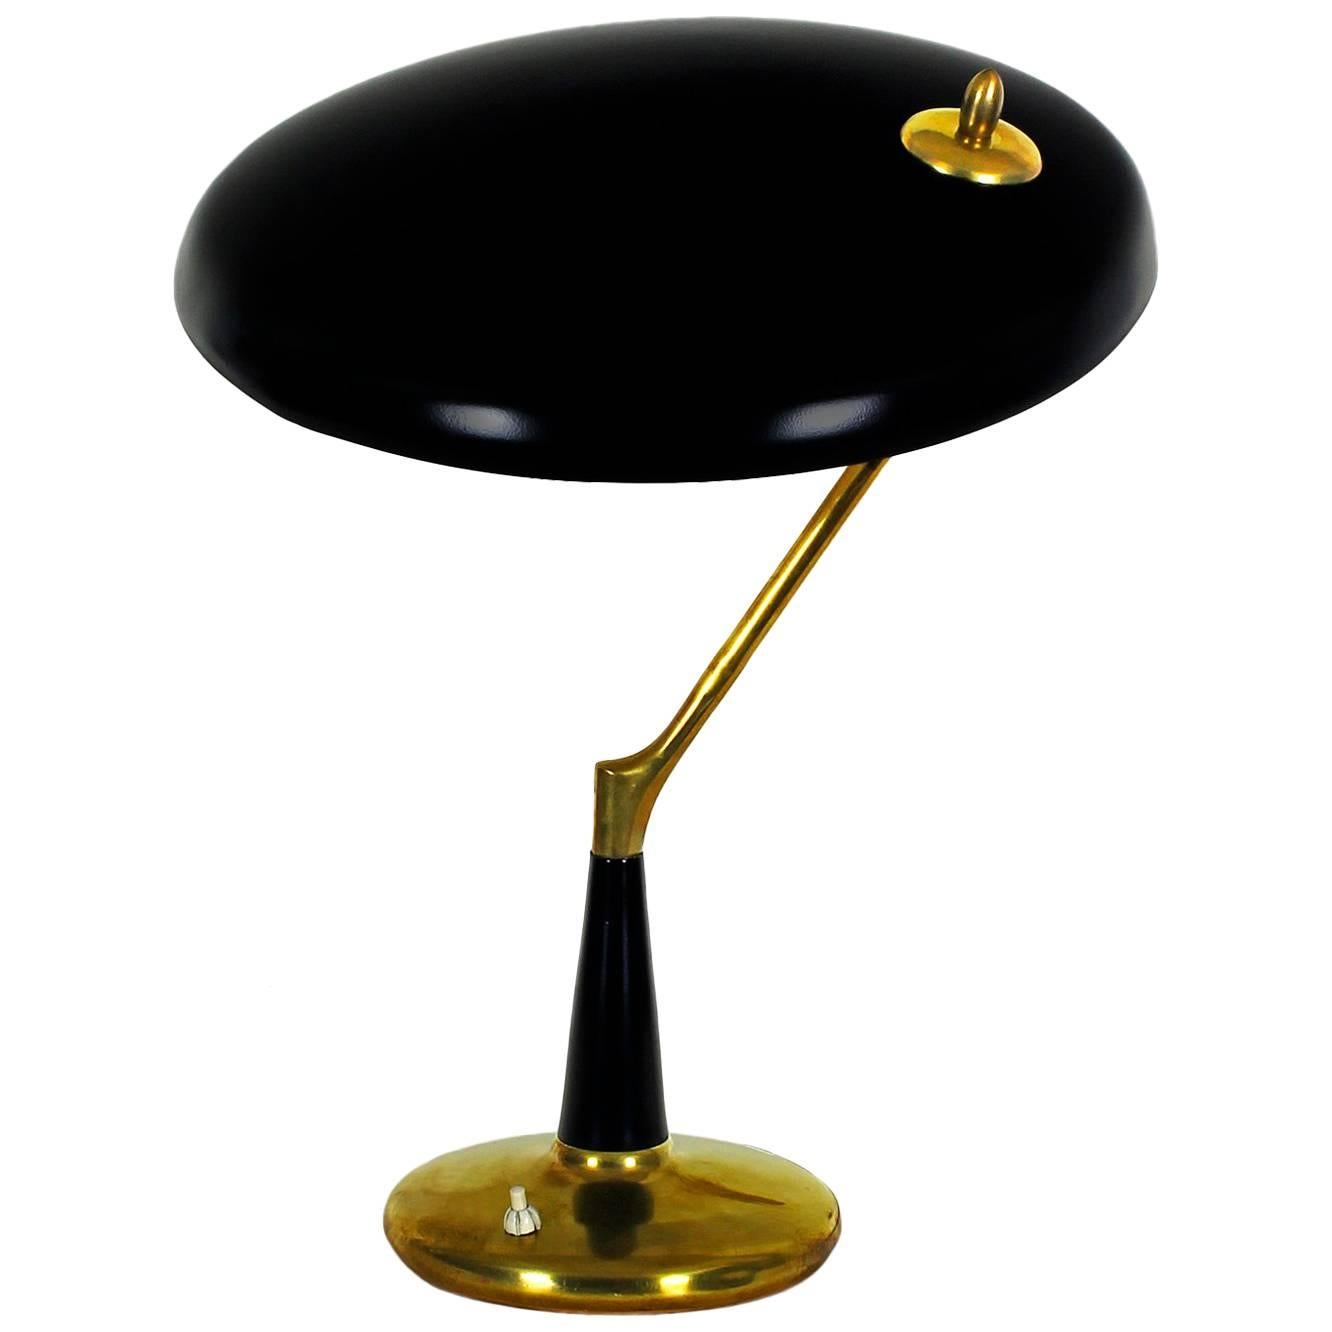 1956 Table Lamp by Oscar Torlasco for Lumi, brass, sheet metal - Italy